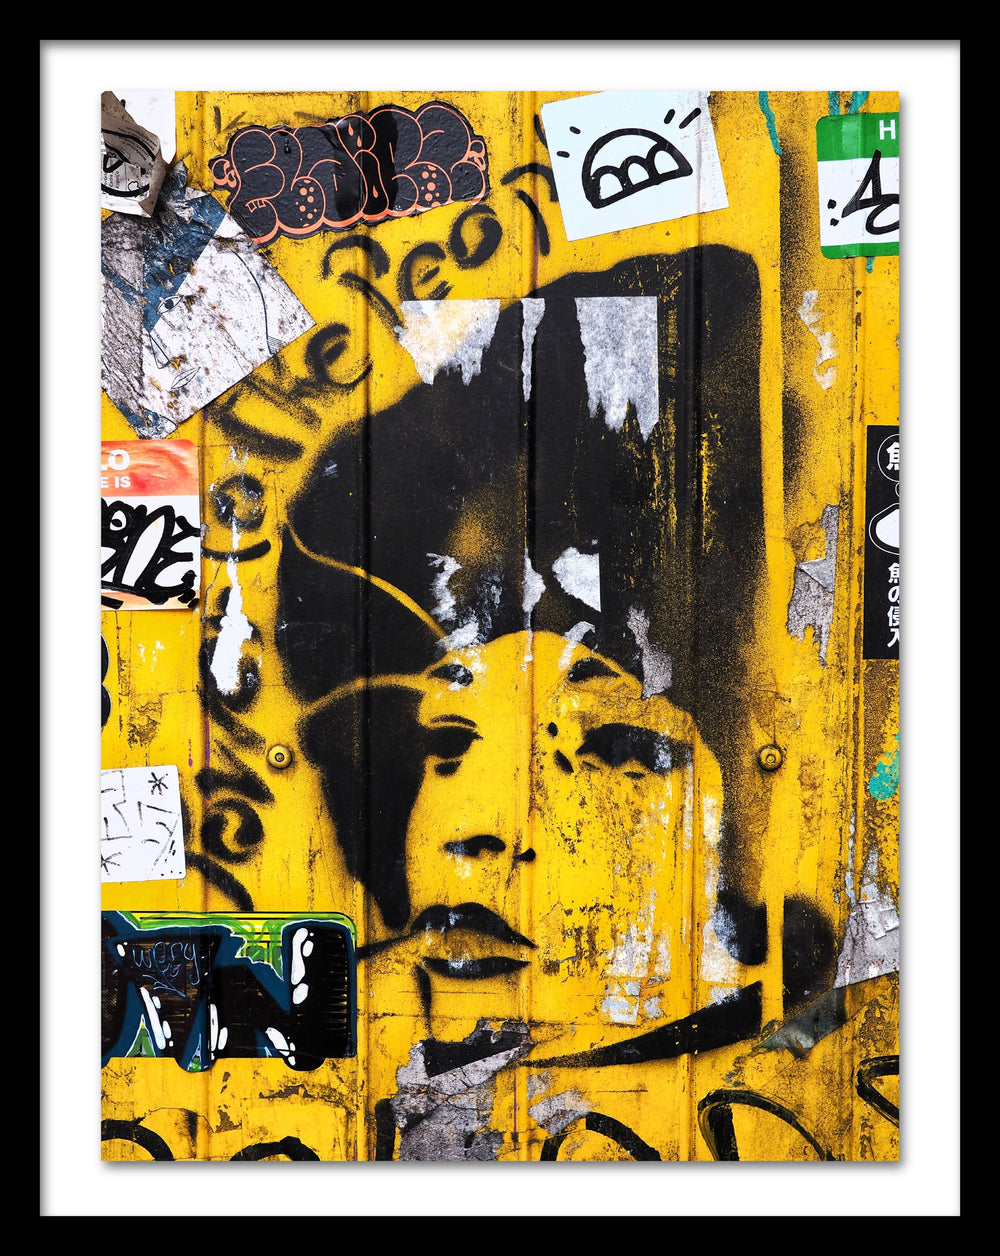 A poster that depicts the portrait of a woman painted with a stencil over a yellow wall